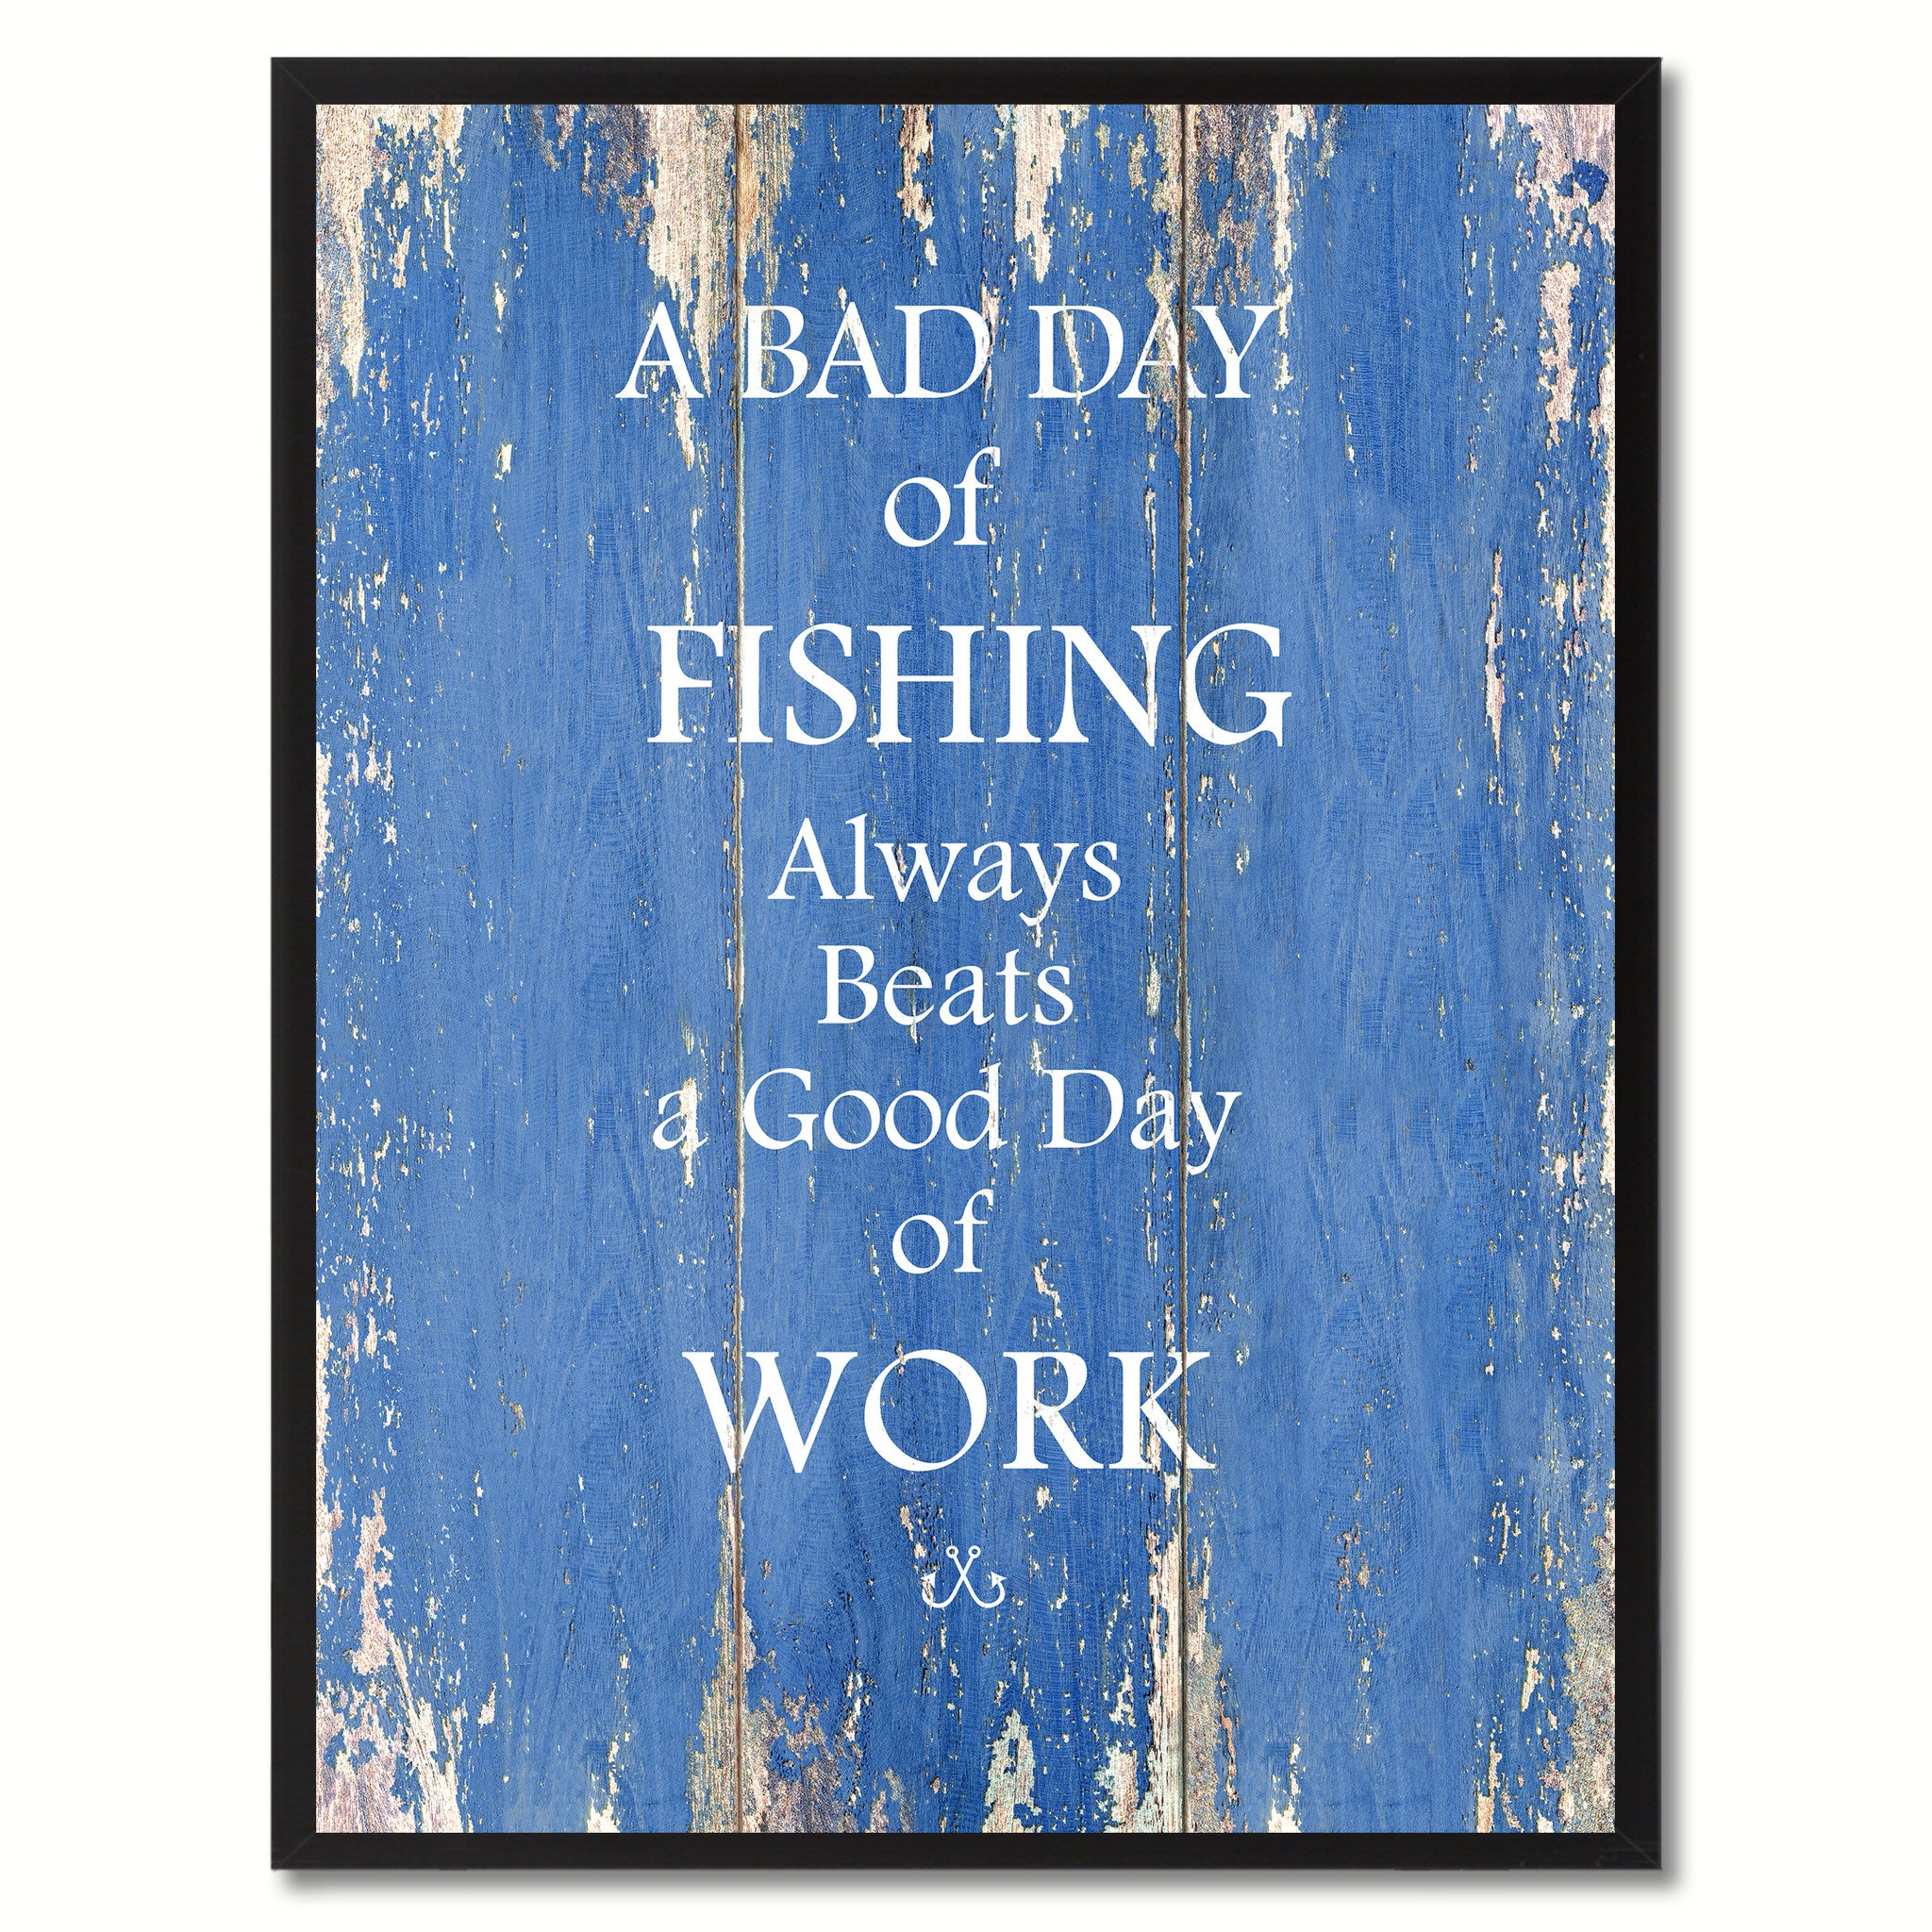 A bad day of fishing Funny Quote Saying Gifts Home Décor Wall Art